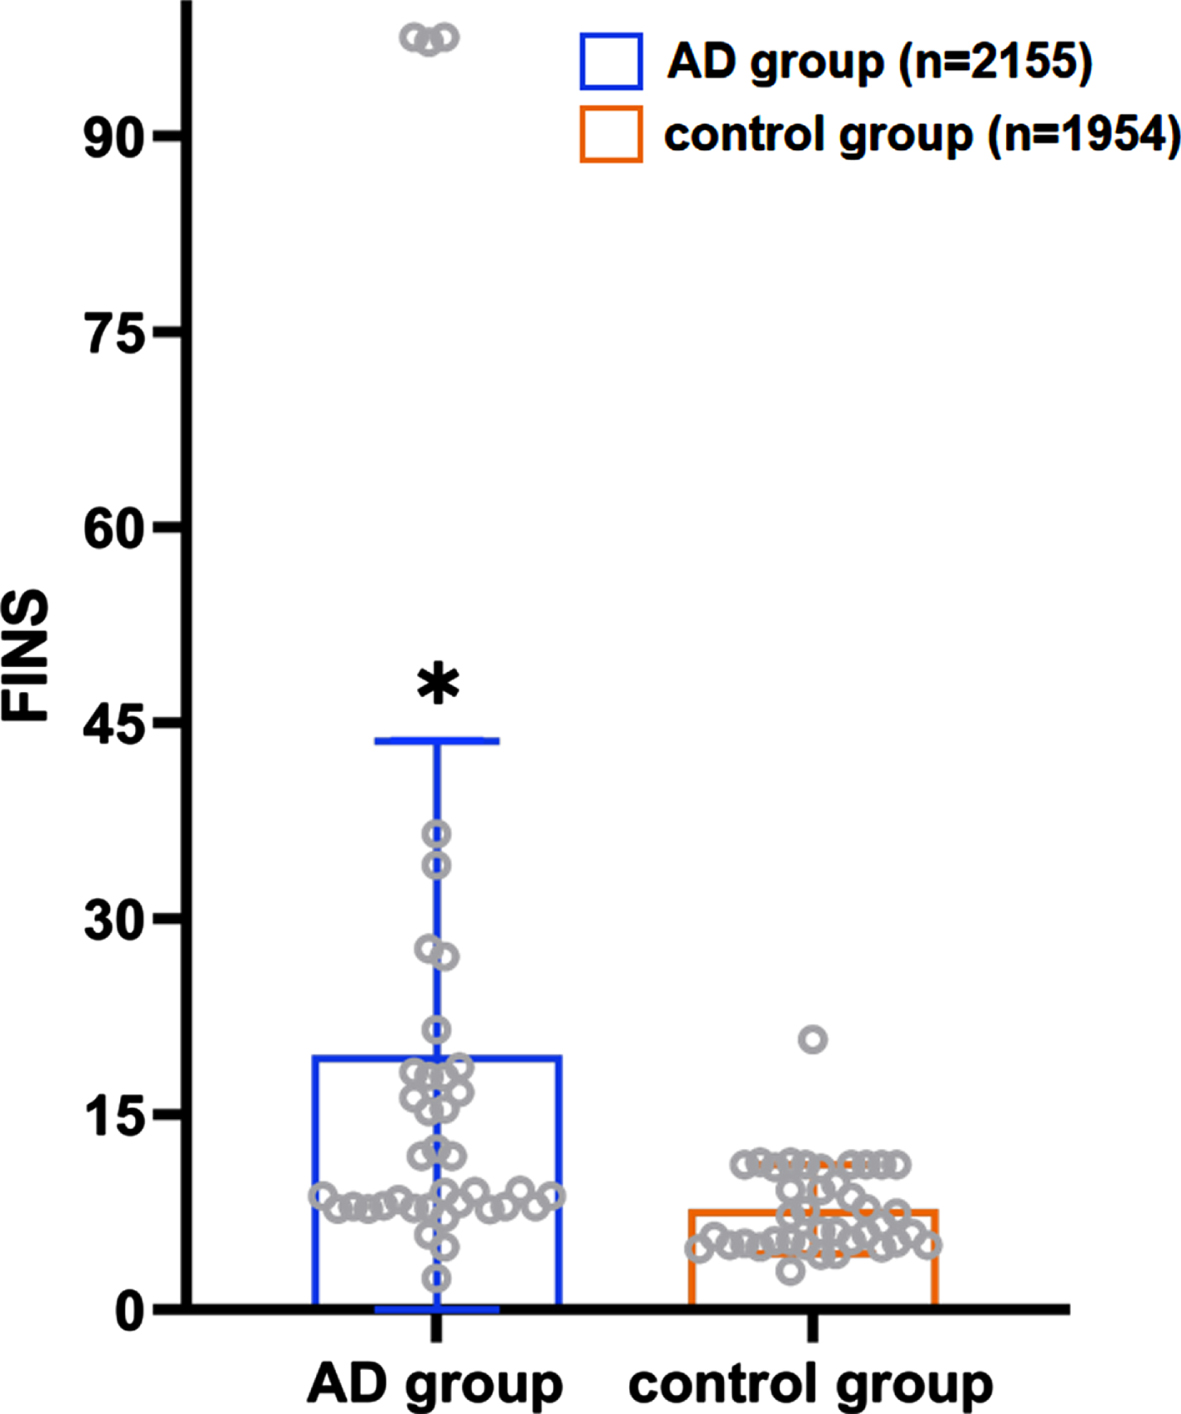 Distribution of the average FINS level in the AD patient group and the control group. *When collecting FINS data, we found that each study had different methods of detecting FINS and different units. Although the units among the studies are not unified here, the units between the control group and the AD group in each study are the same. Therefore, we only show the significance of the data differences between FINS in the studies.